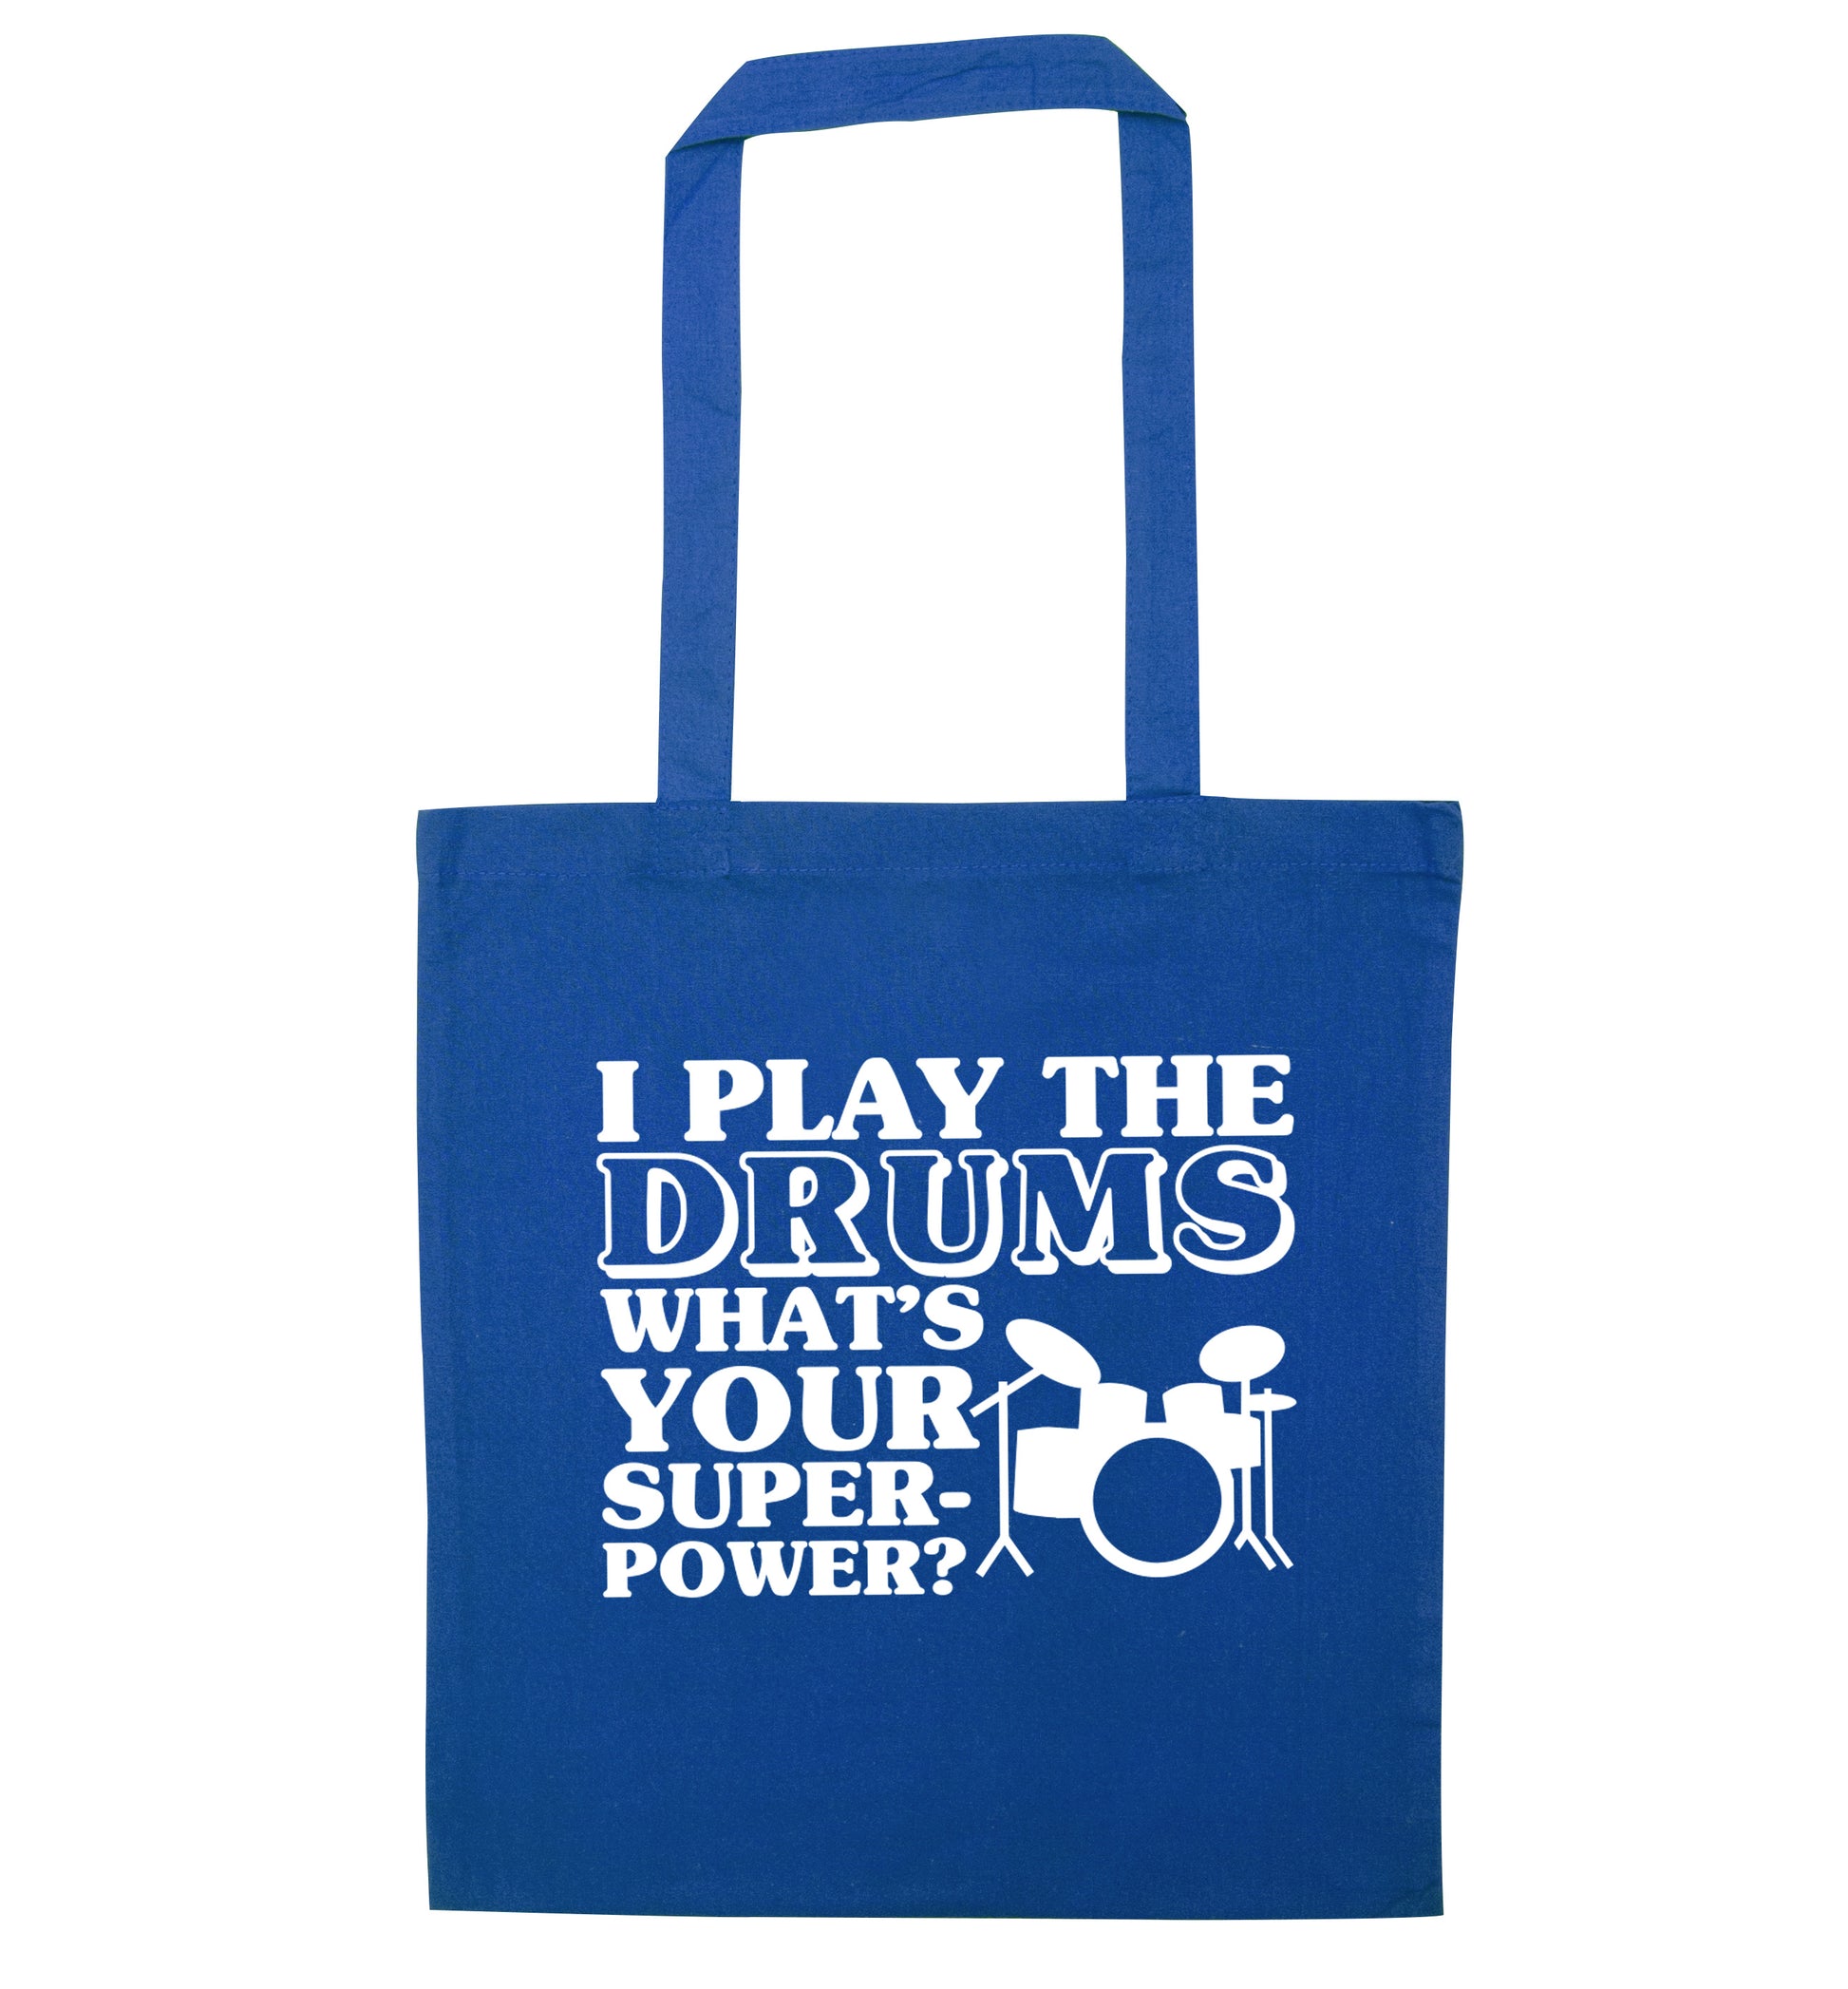 I play the drums what's your superpower? blue tote bag